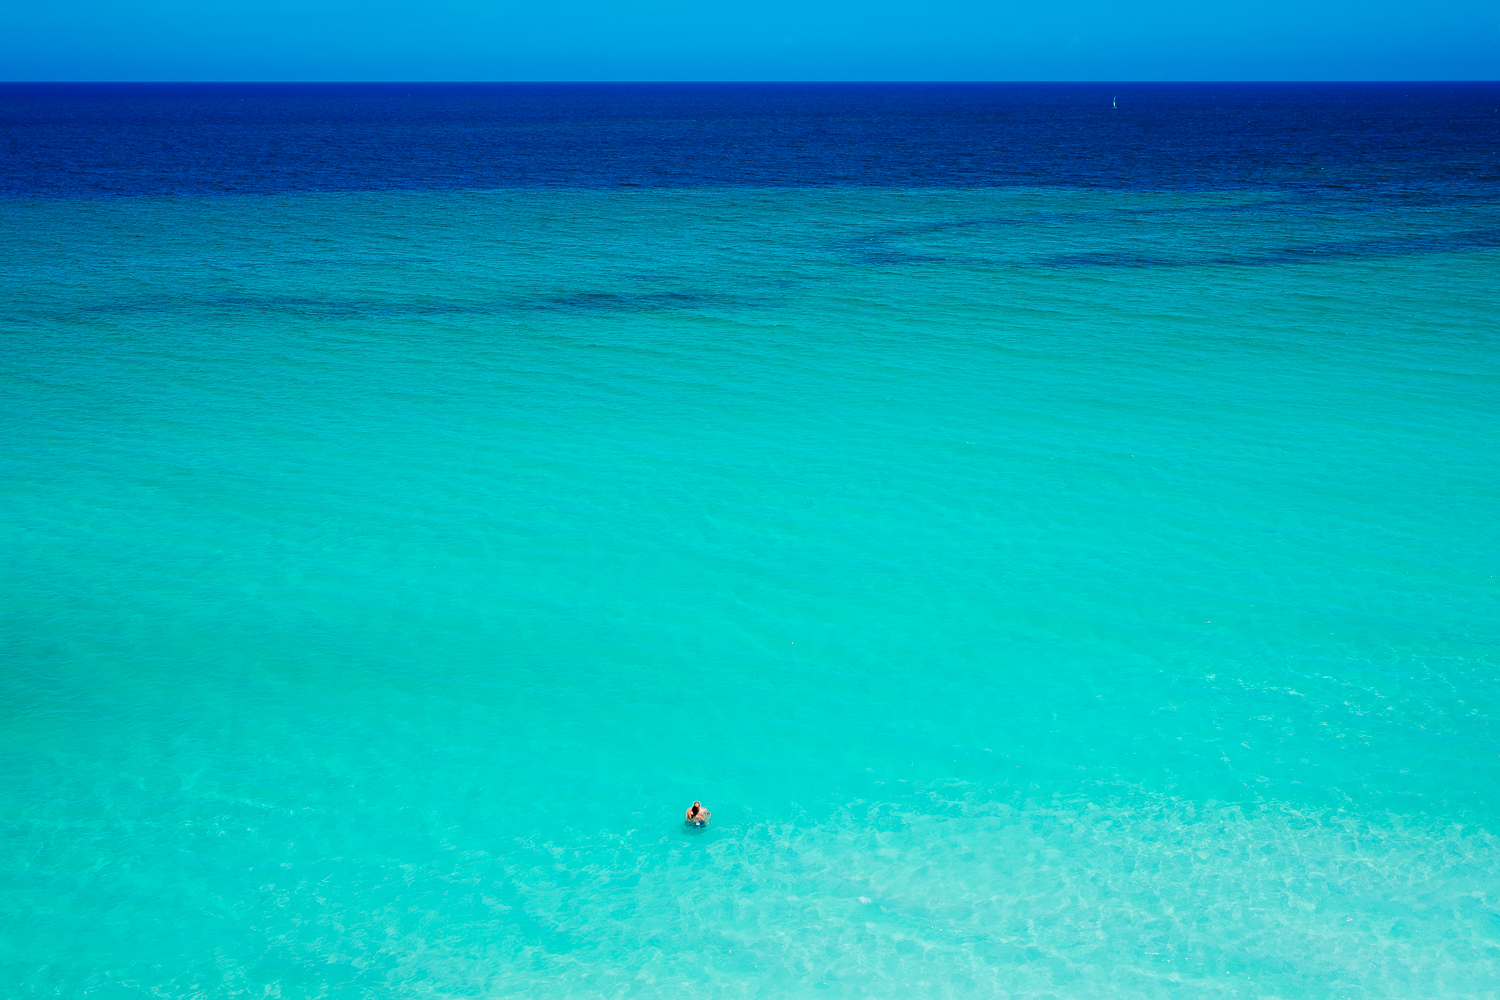  A couple all alone in the ocean in Varadero, Cuba 2015. 